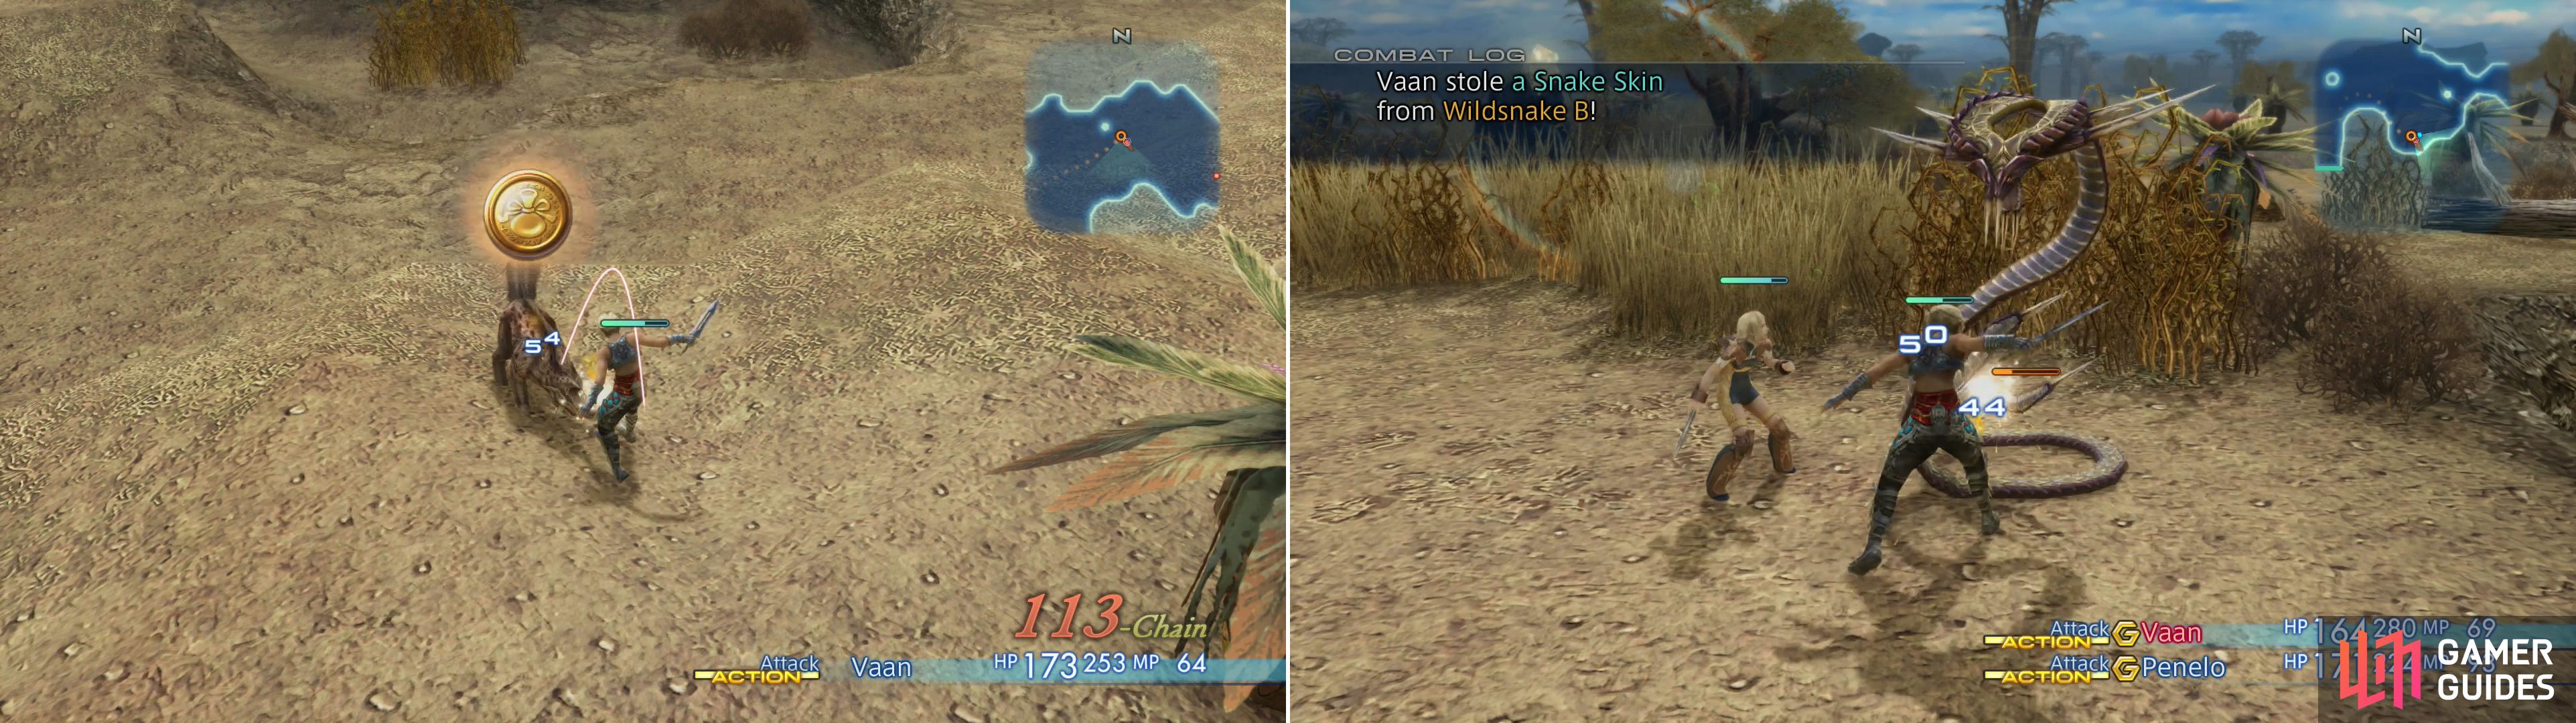 The more of the same monster you kill consecutively, the higher your battle chain number (left), improving loot drops. Some rare loot, like Snake Skin can only be stolen (right).